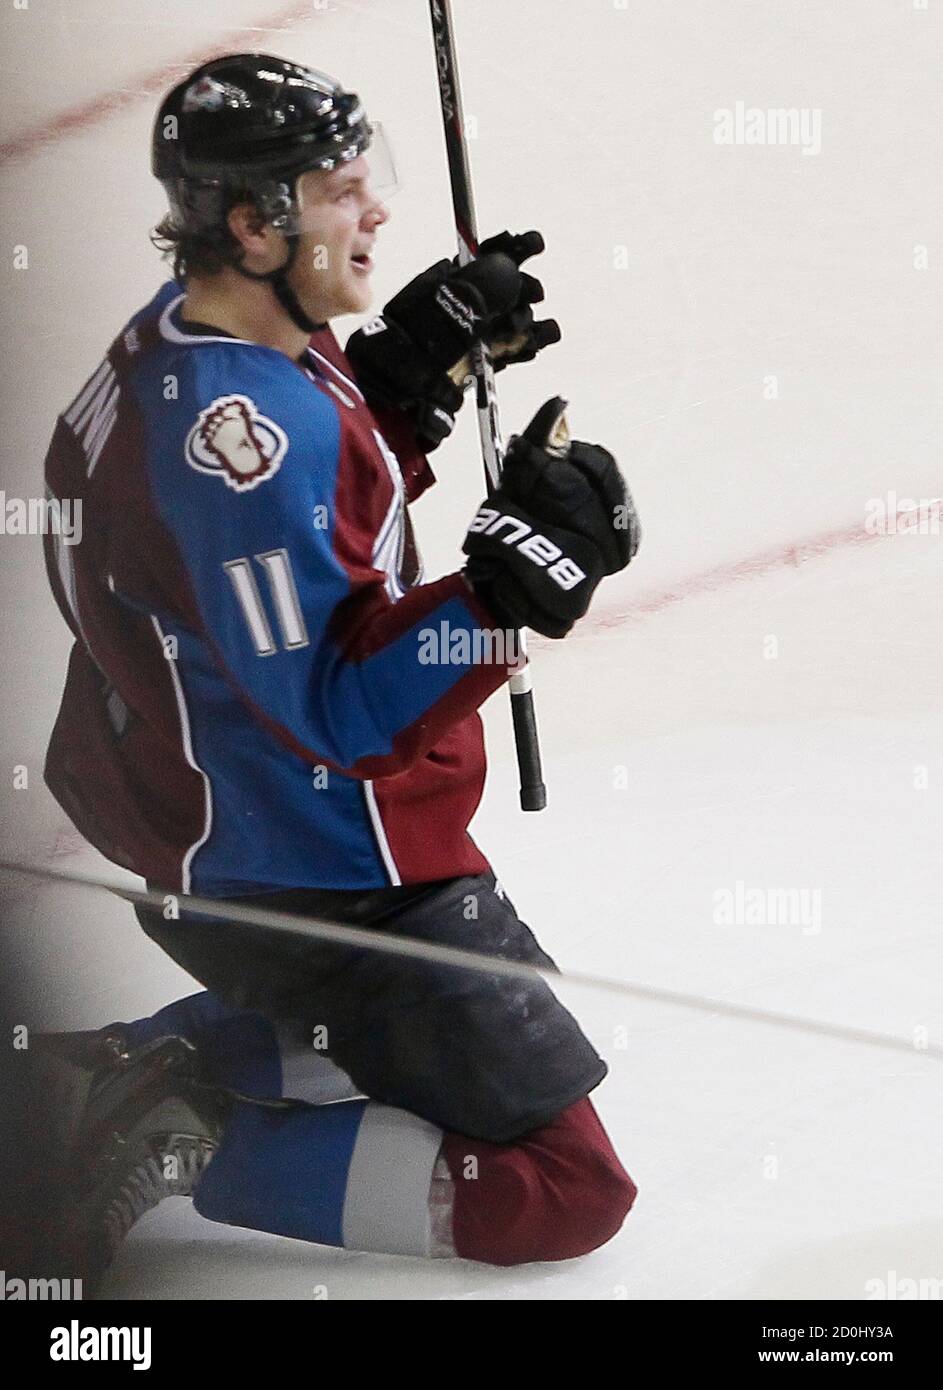 Colorado Avalanche's Jamie McGinn celebrates scoring past the Chicago Blackhawks in their NHL hockey game in Denver March 8, 2013. REUTERS/Rick Wilking (UNITED STATES - Tags: SPORT ICE HOCKEY) Stock Photo